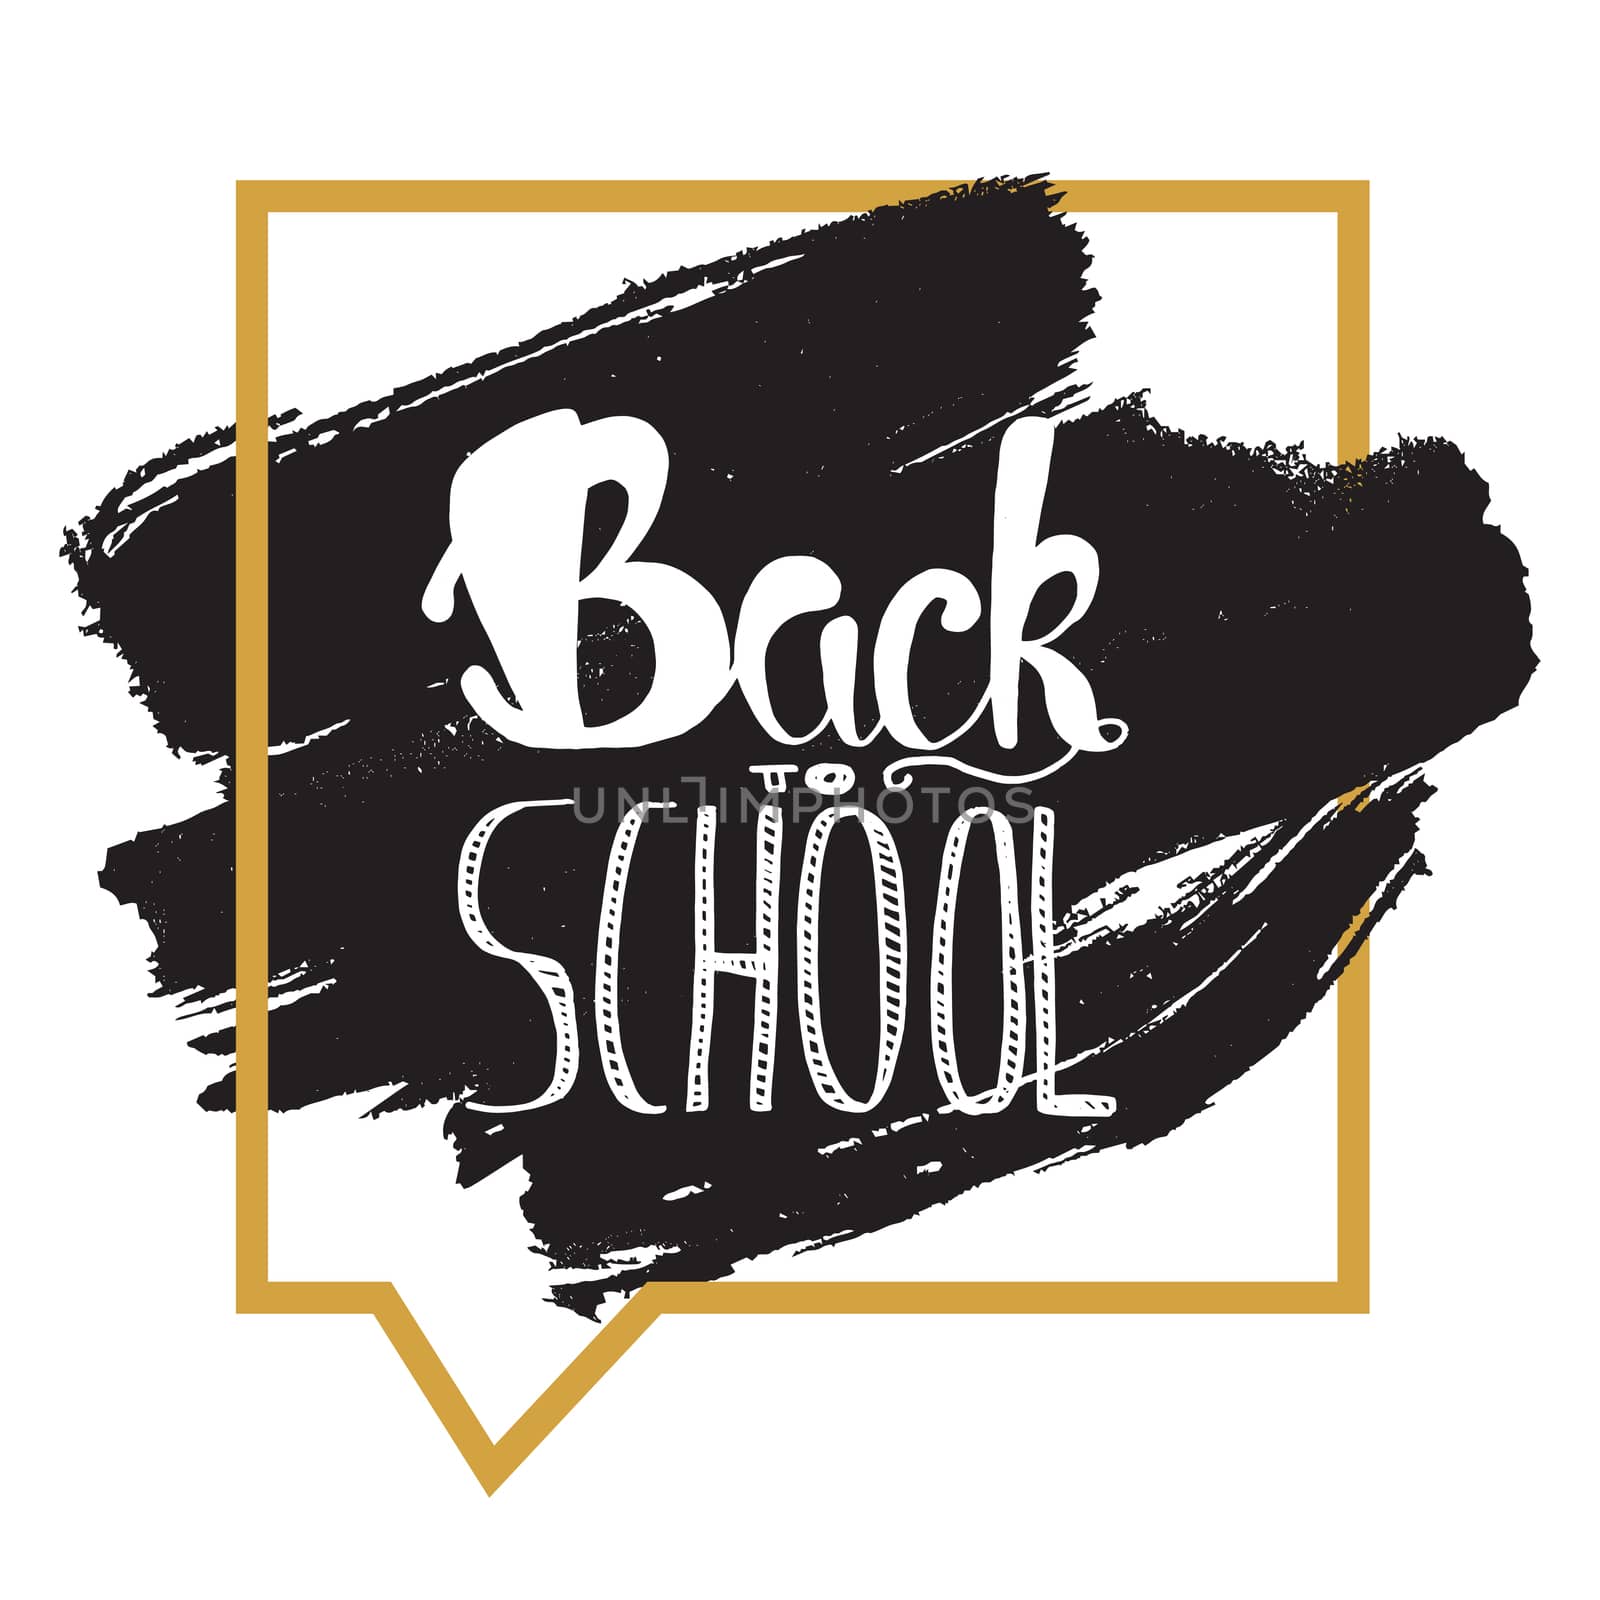 Back To School Lettering by barsrsind